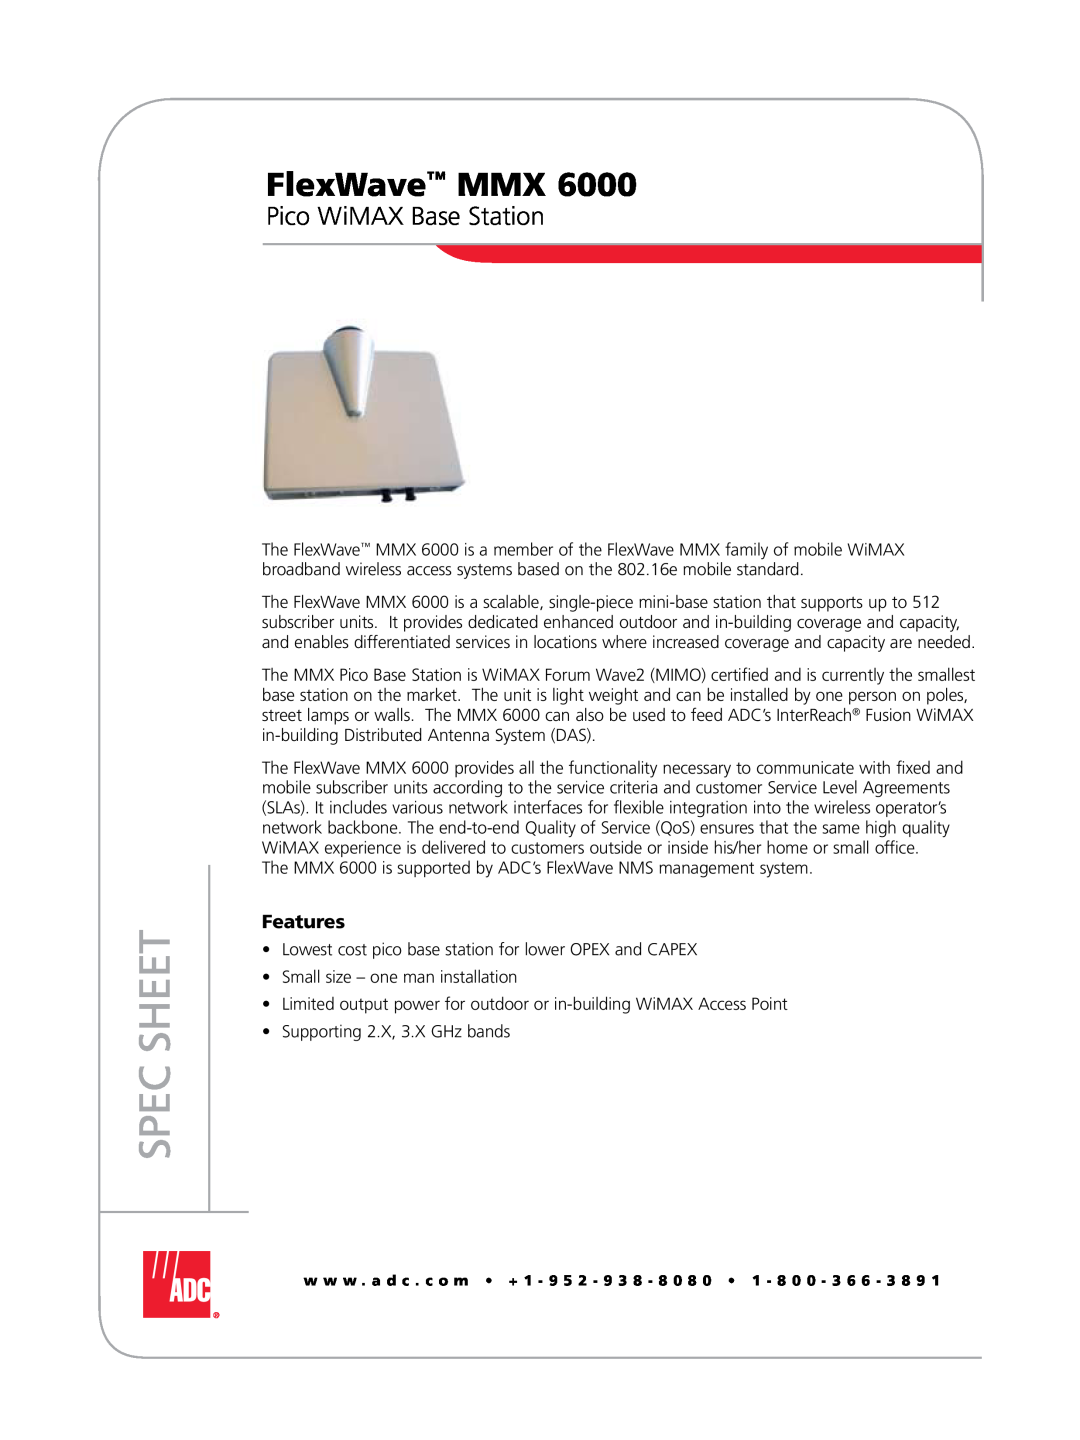 ADC MMX 6000 manual FlexWave MMX, Pico WiMAX Base Station, Spec Sheet, Features 